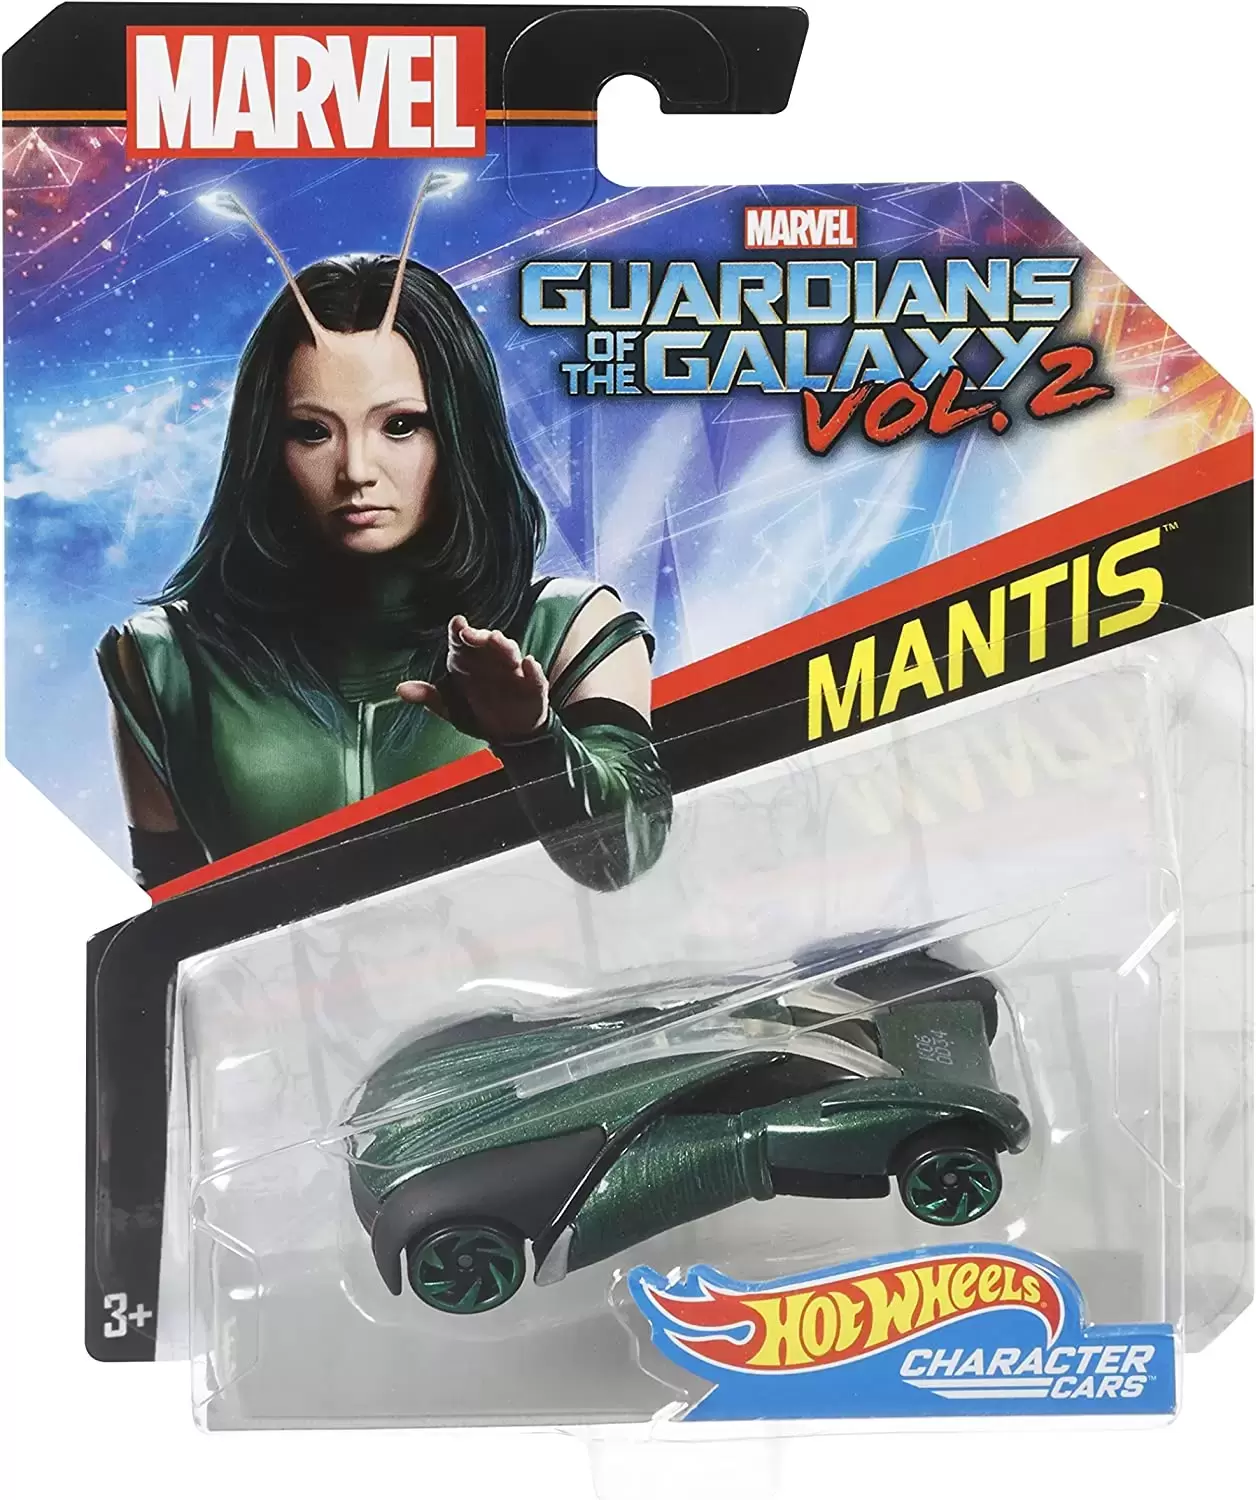 Marvel Character Cars - Guardians of the Galaxy Vol.2 - Mantis